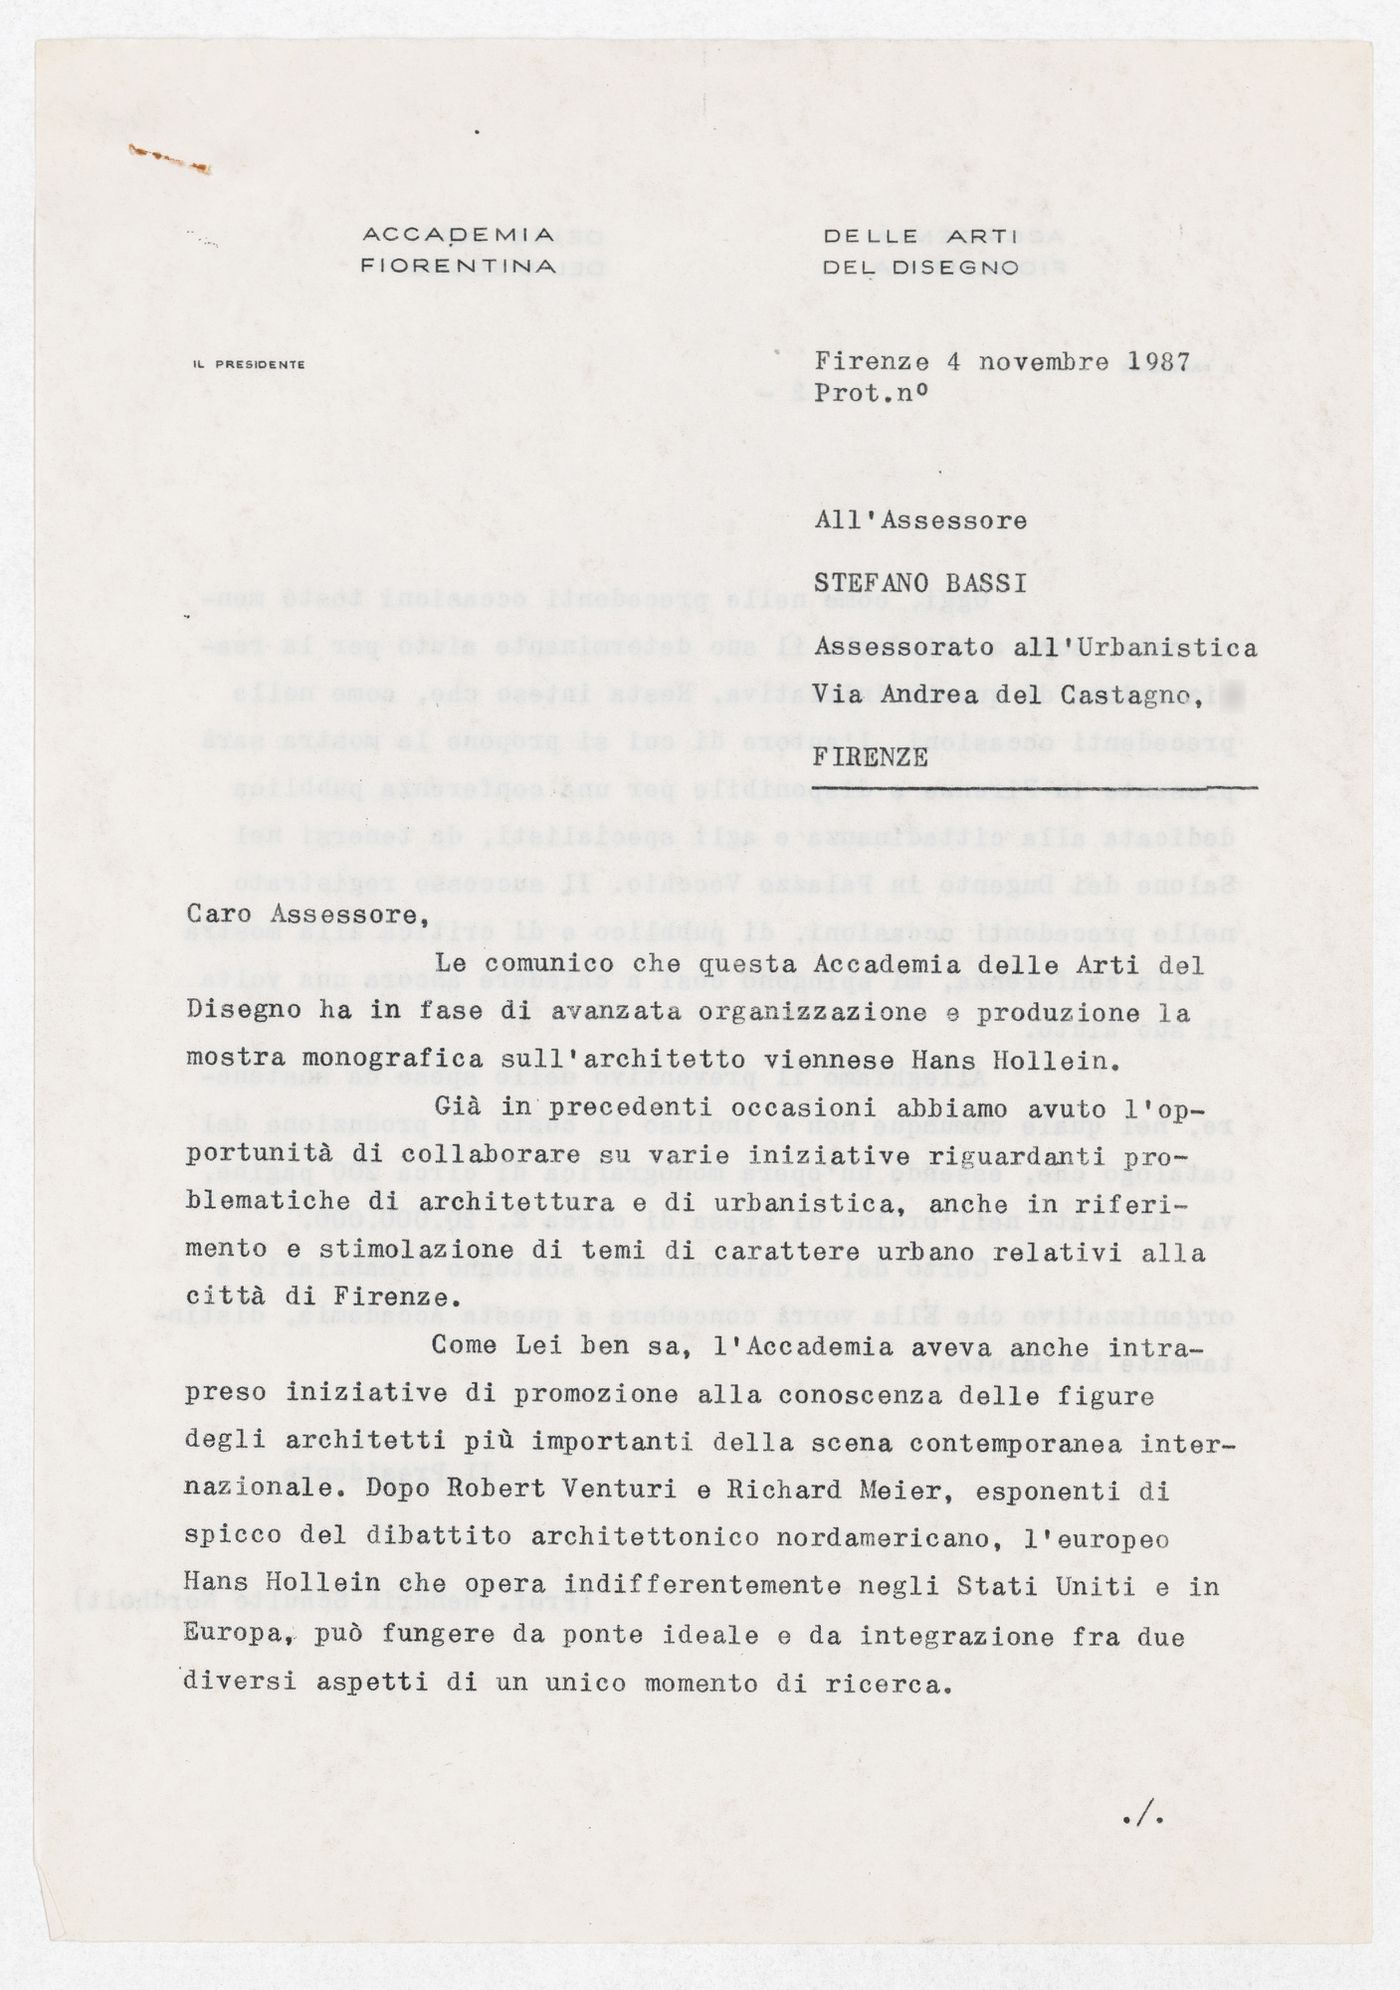 Correspondence and a budget for the exhibition Hans Hollein. Opere 1960-1988